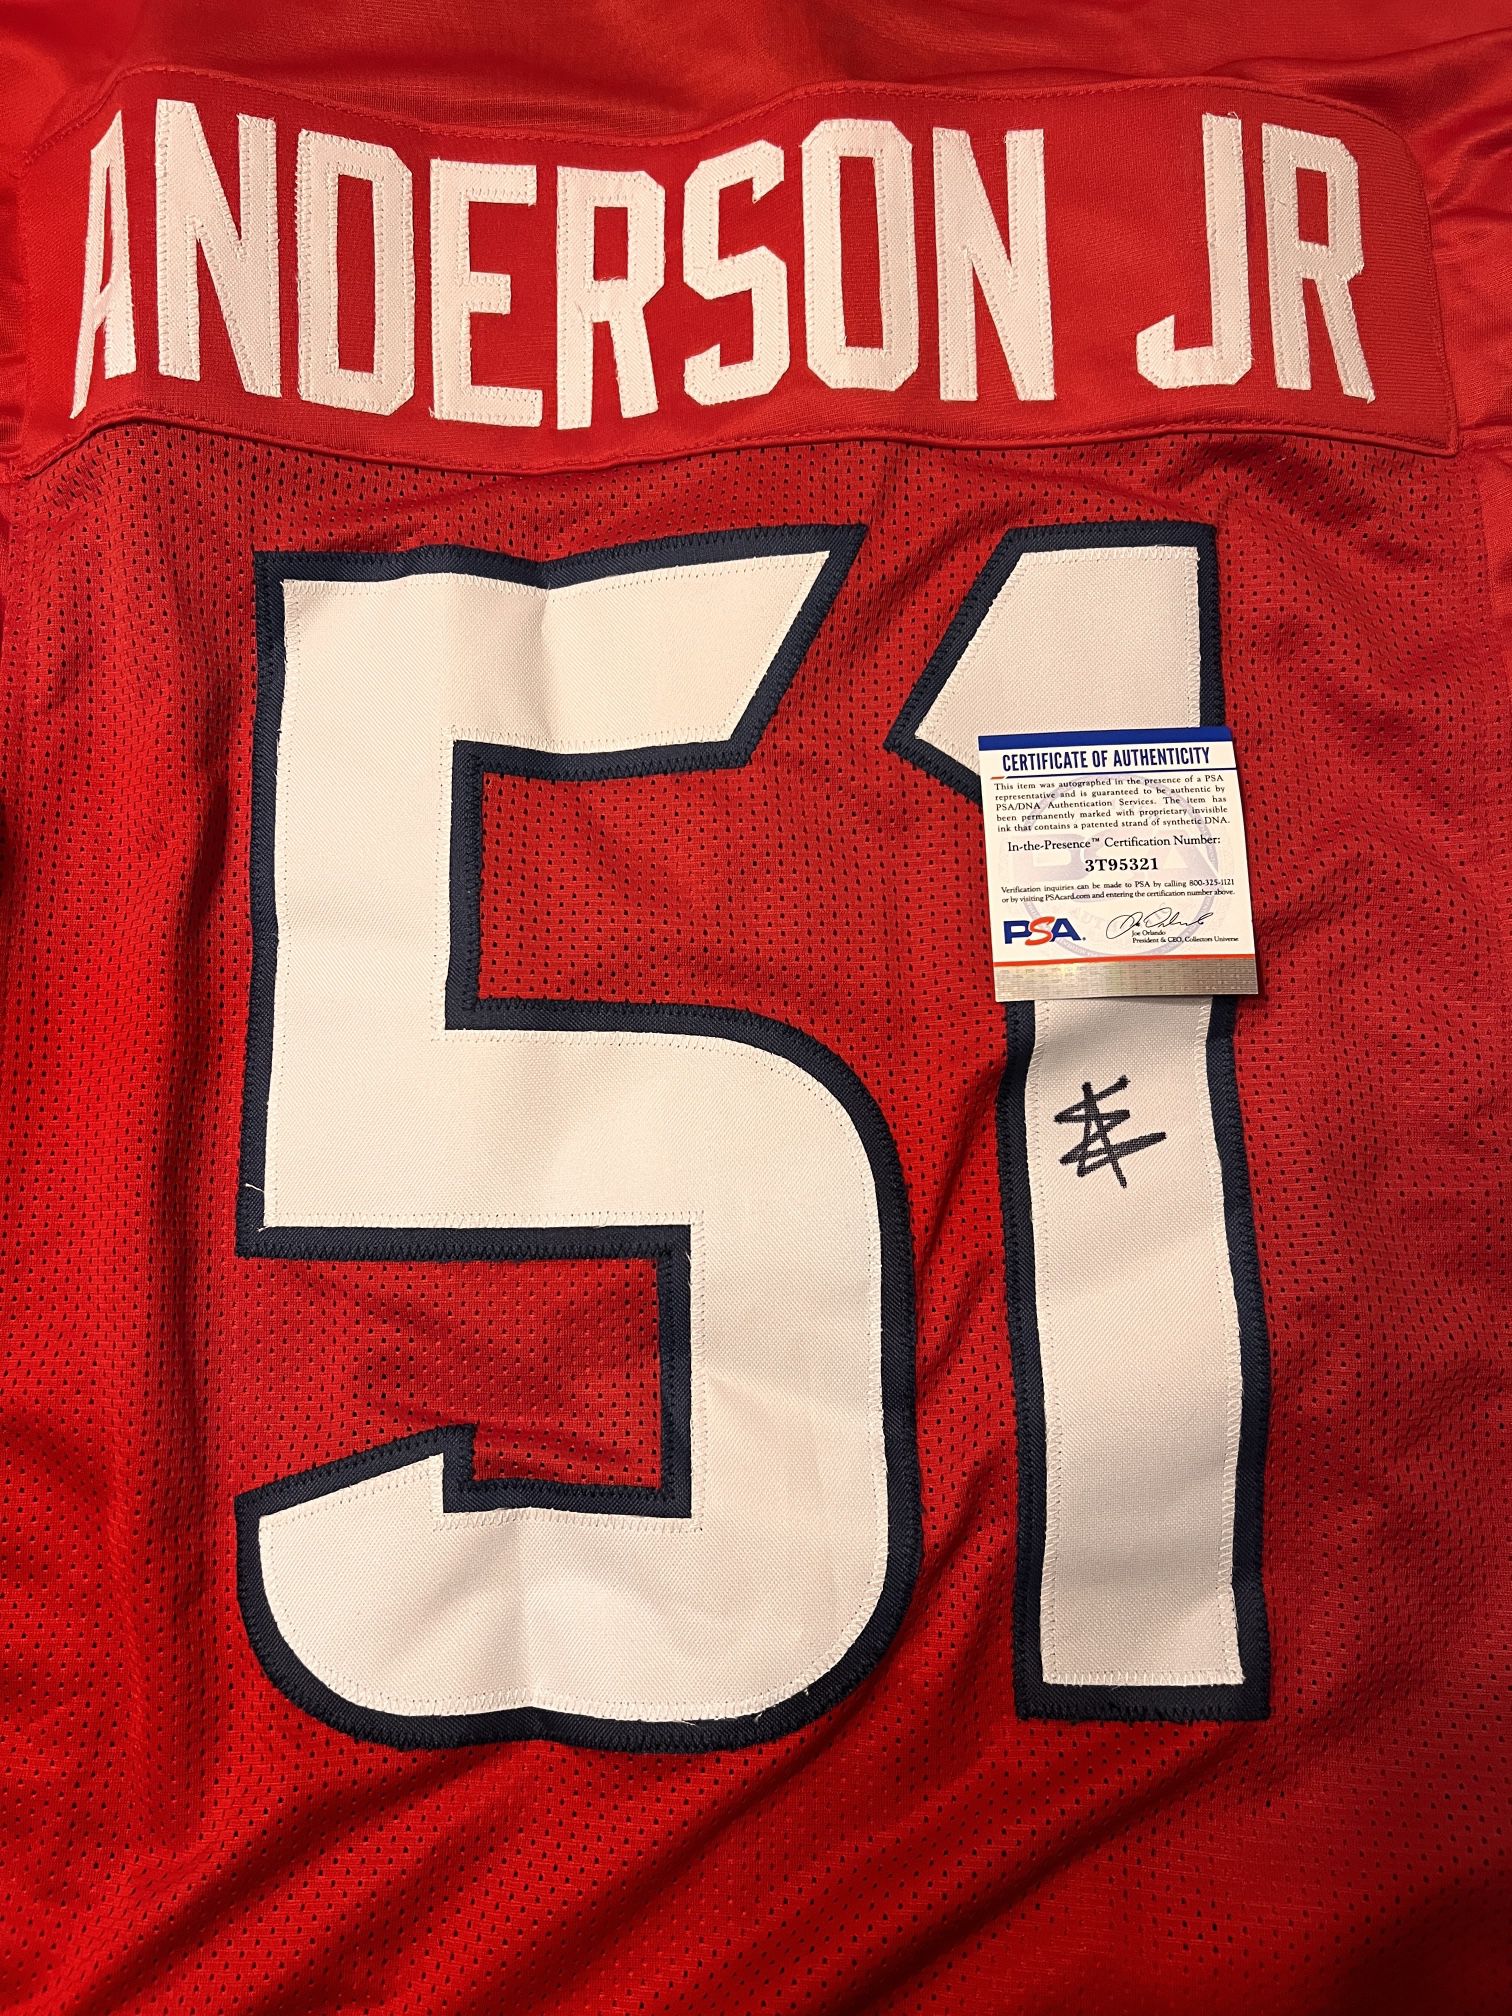 Will Anderson Jr Autographed Jersey